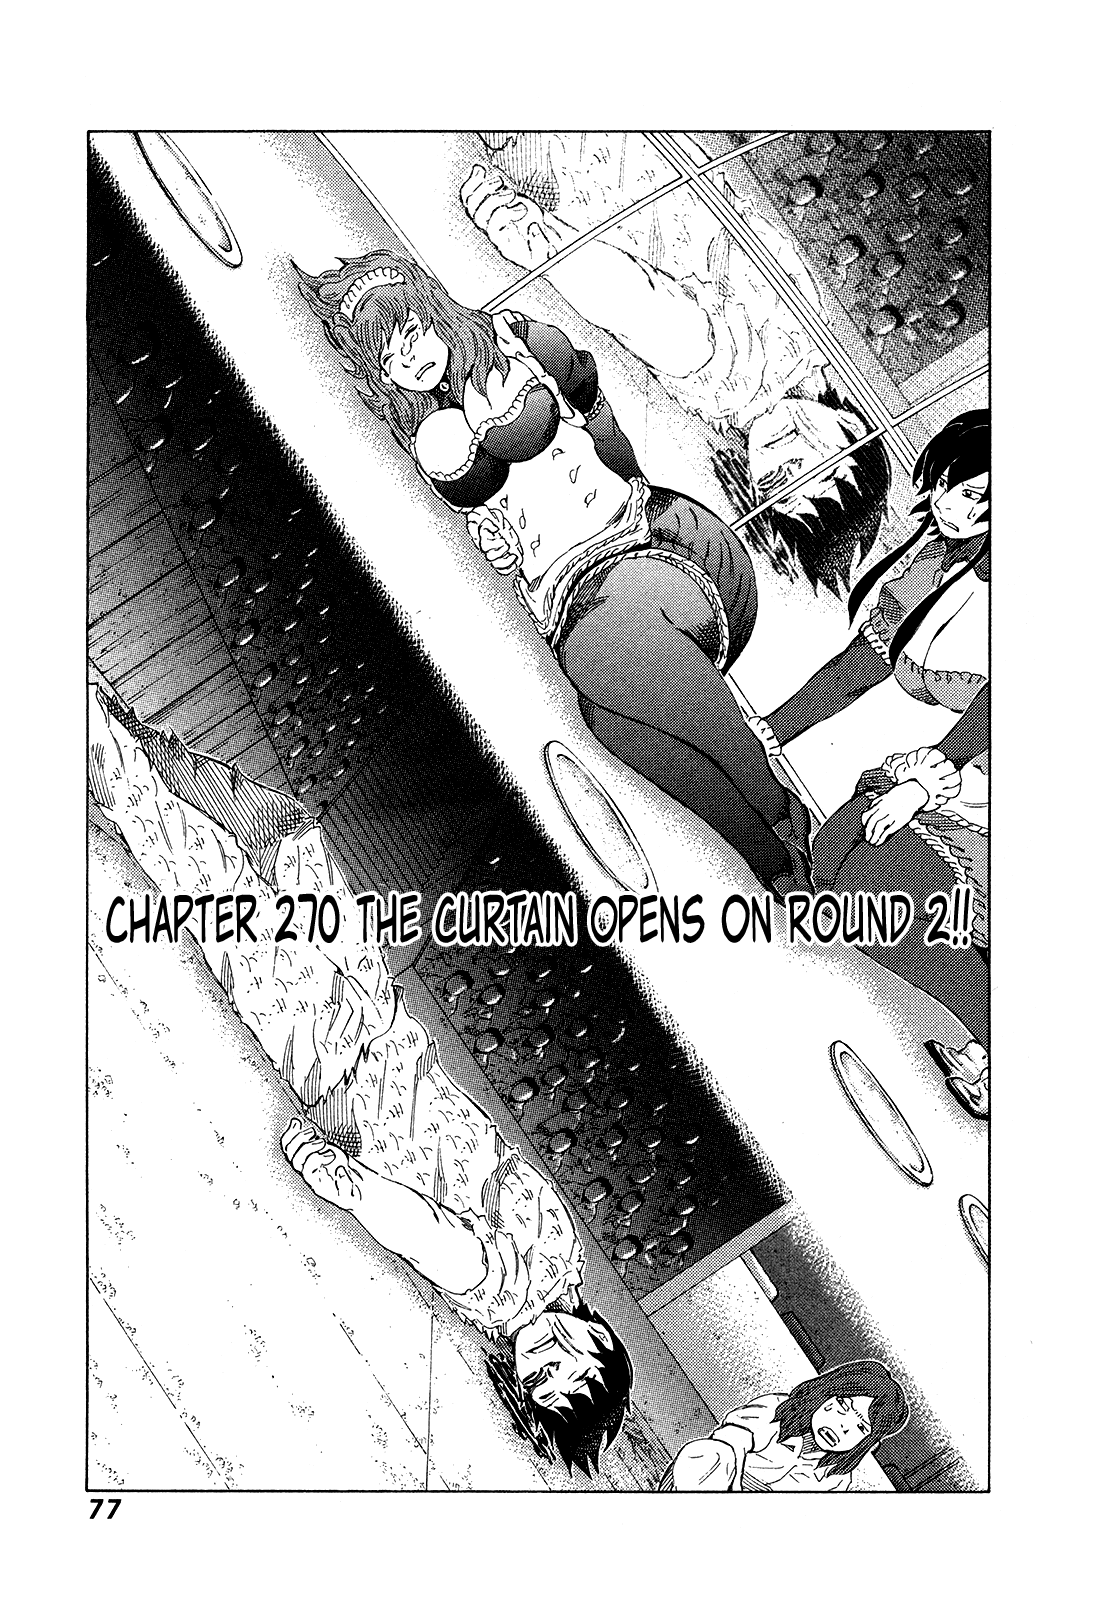 81 Diver Chapter 270 #1